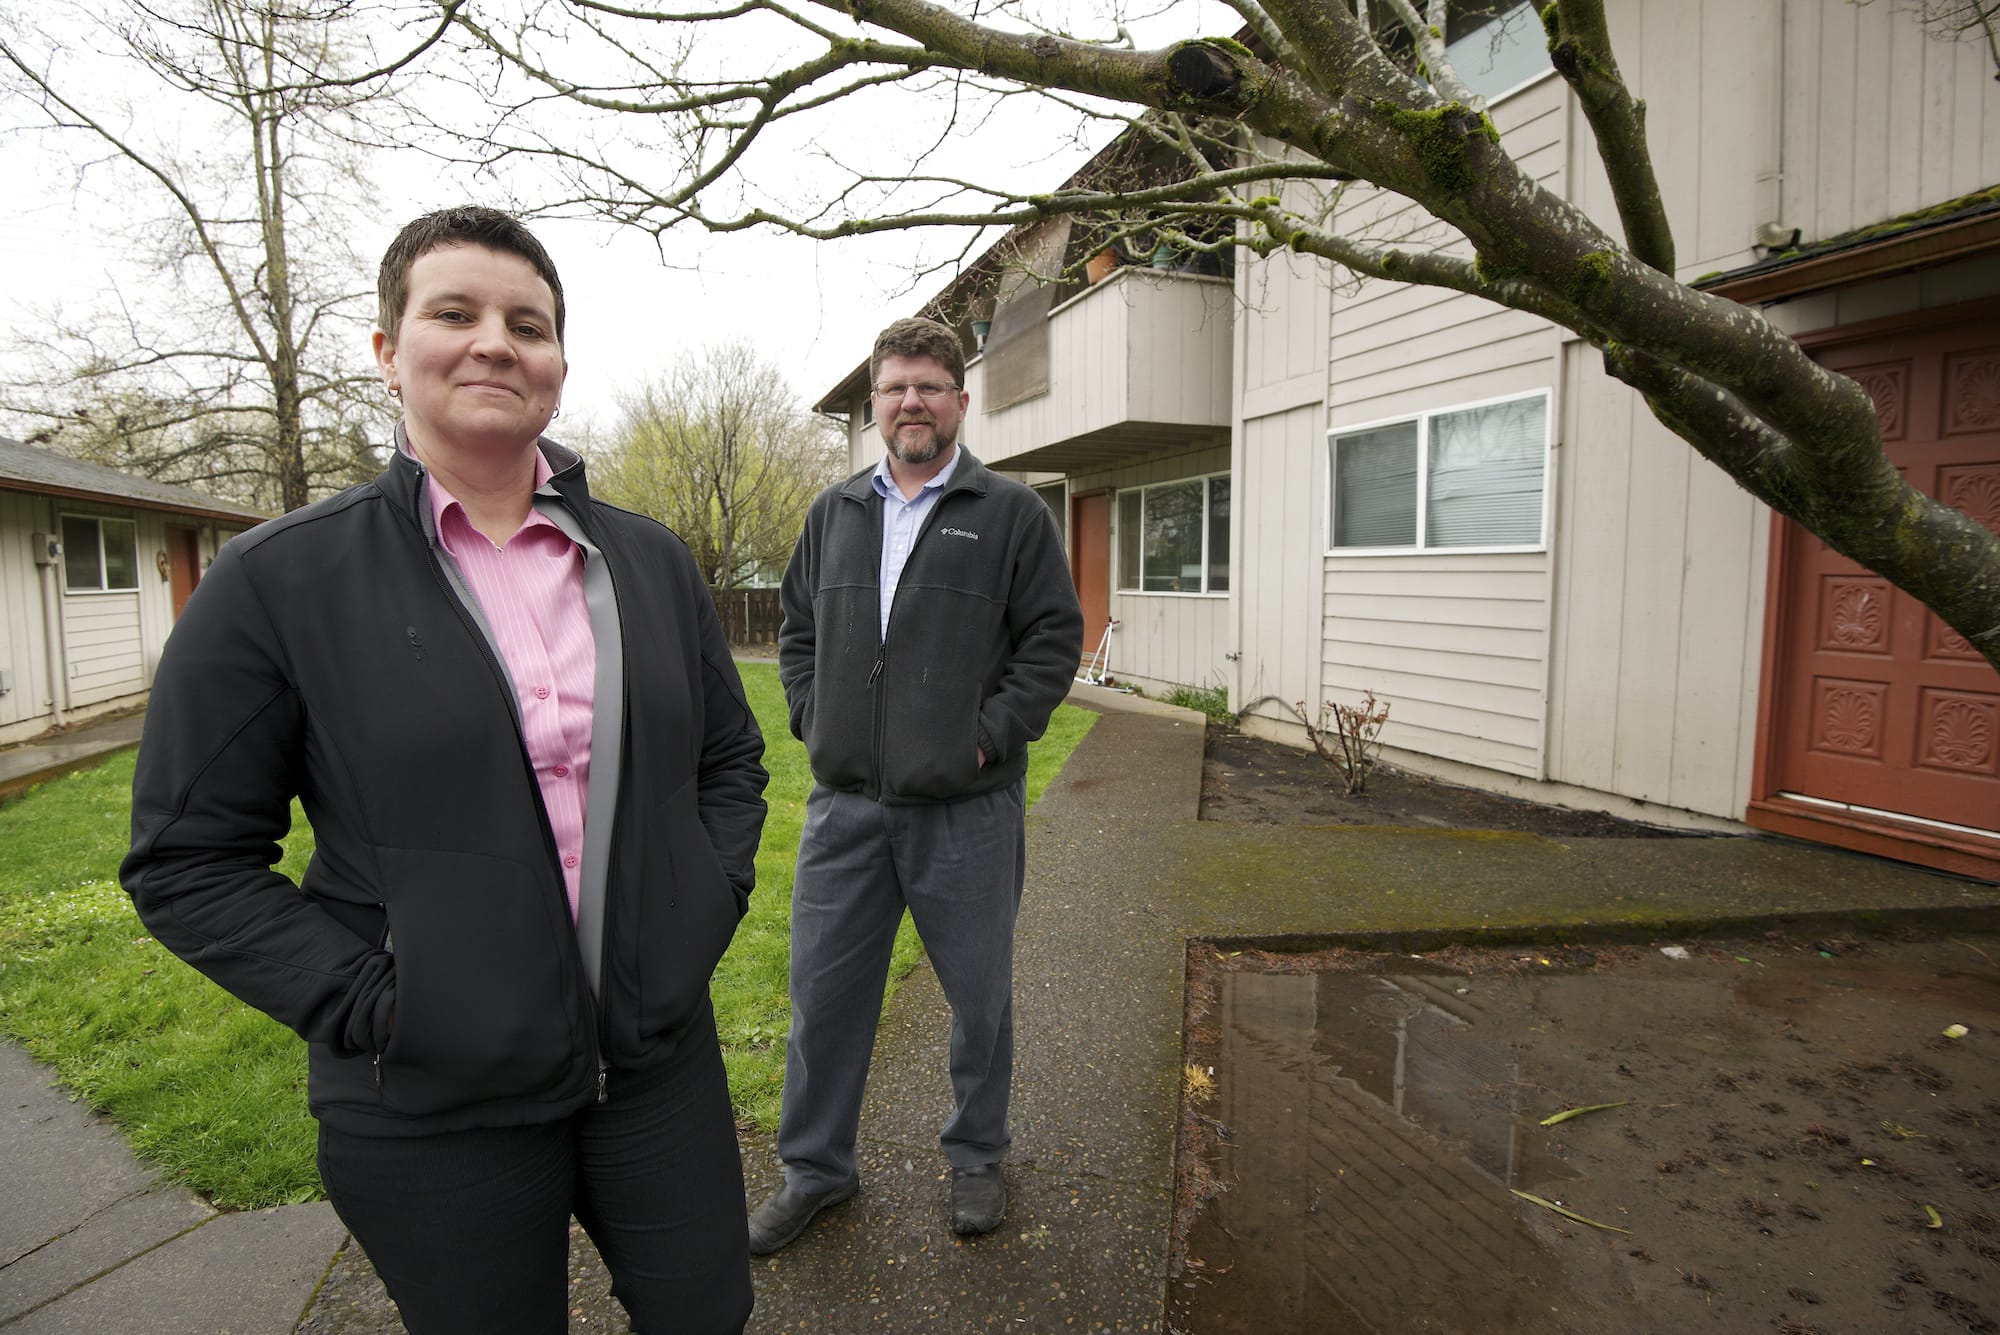 Kris Hanson, left, director of affordable housing for the Vancouver Housing Authority, and Craig Lyons, former director of the Council for the Homeless who now works for Key Property Services Inc., visit the Pinewood Terrace apartments on Kauffman Avenue.